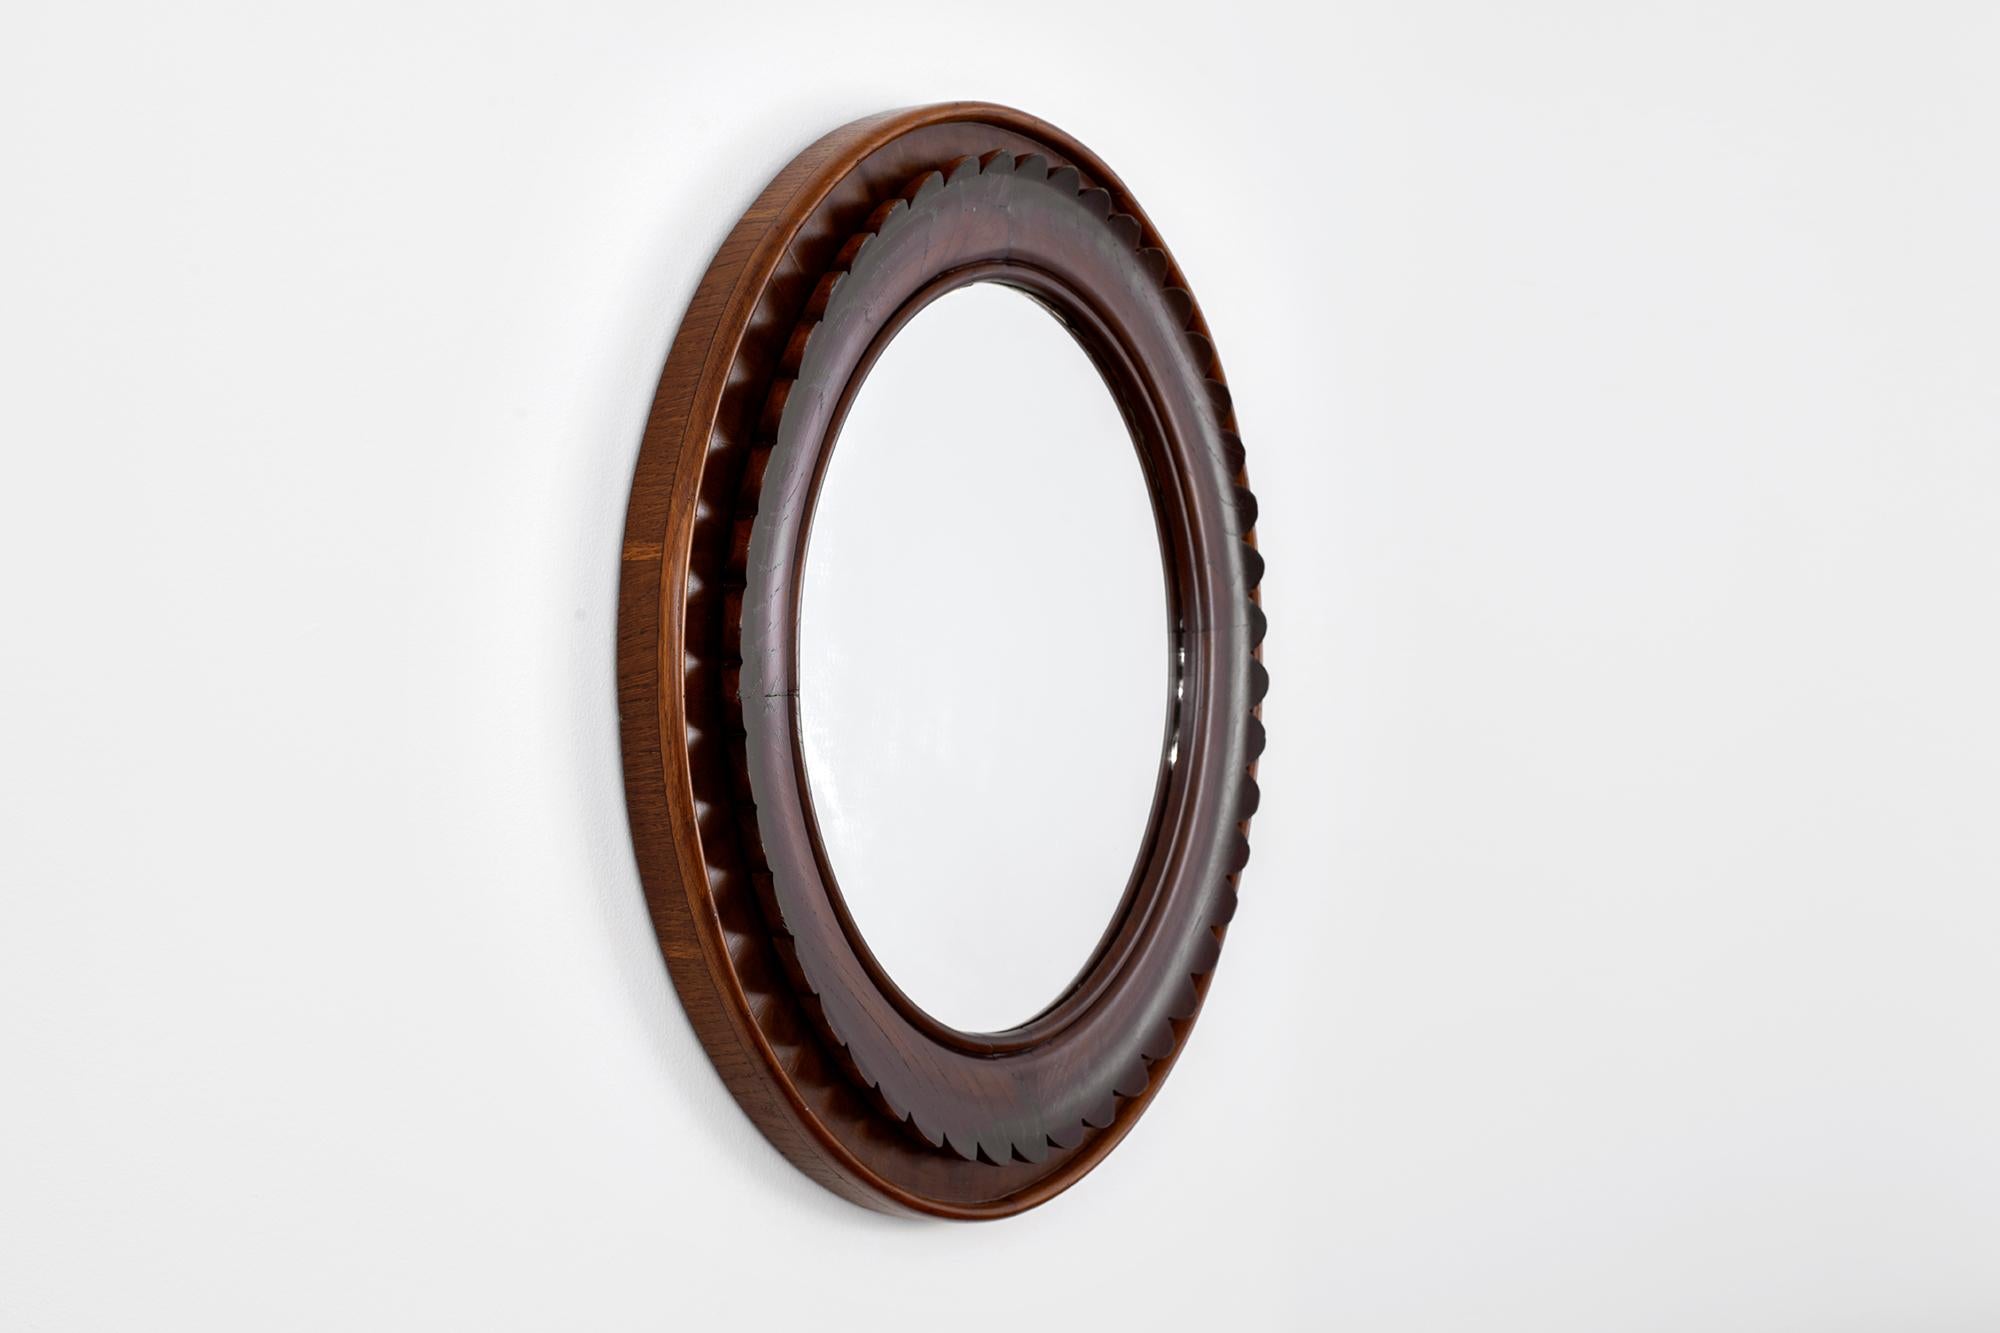 Italian mirror designed by Fratelli Marelli for Framar, circa 1940s.
Walnut and mahogany wood with intricate scalloped detailing and wonderful patina. 
A sculptural piece of art.